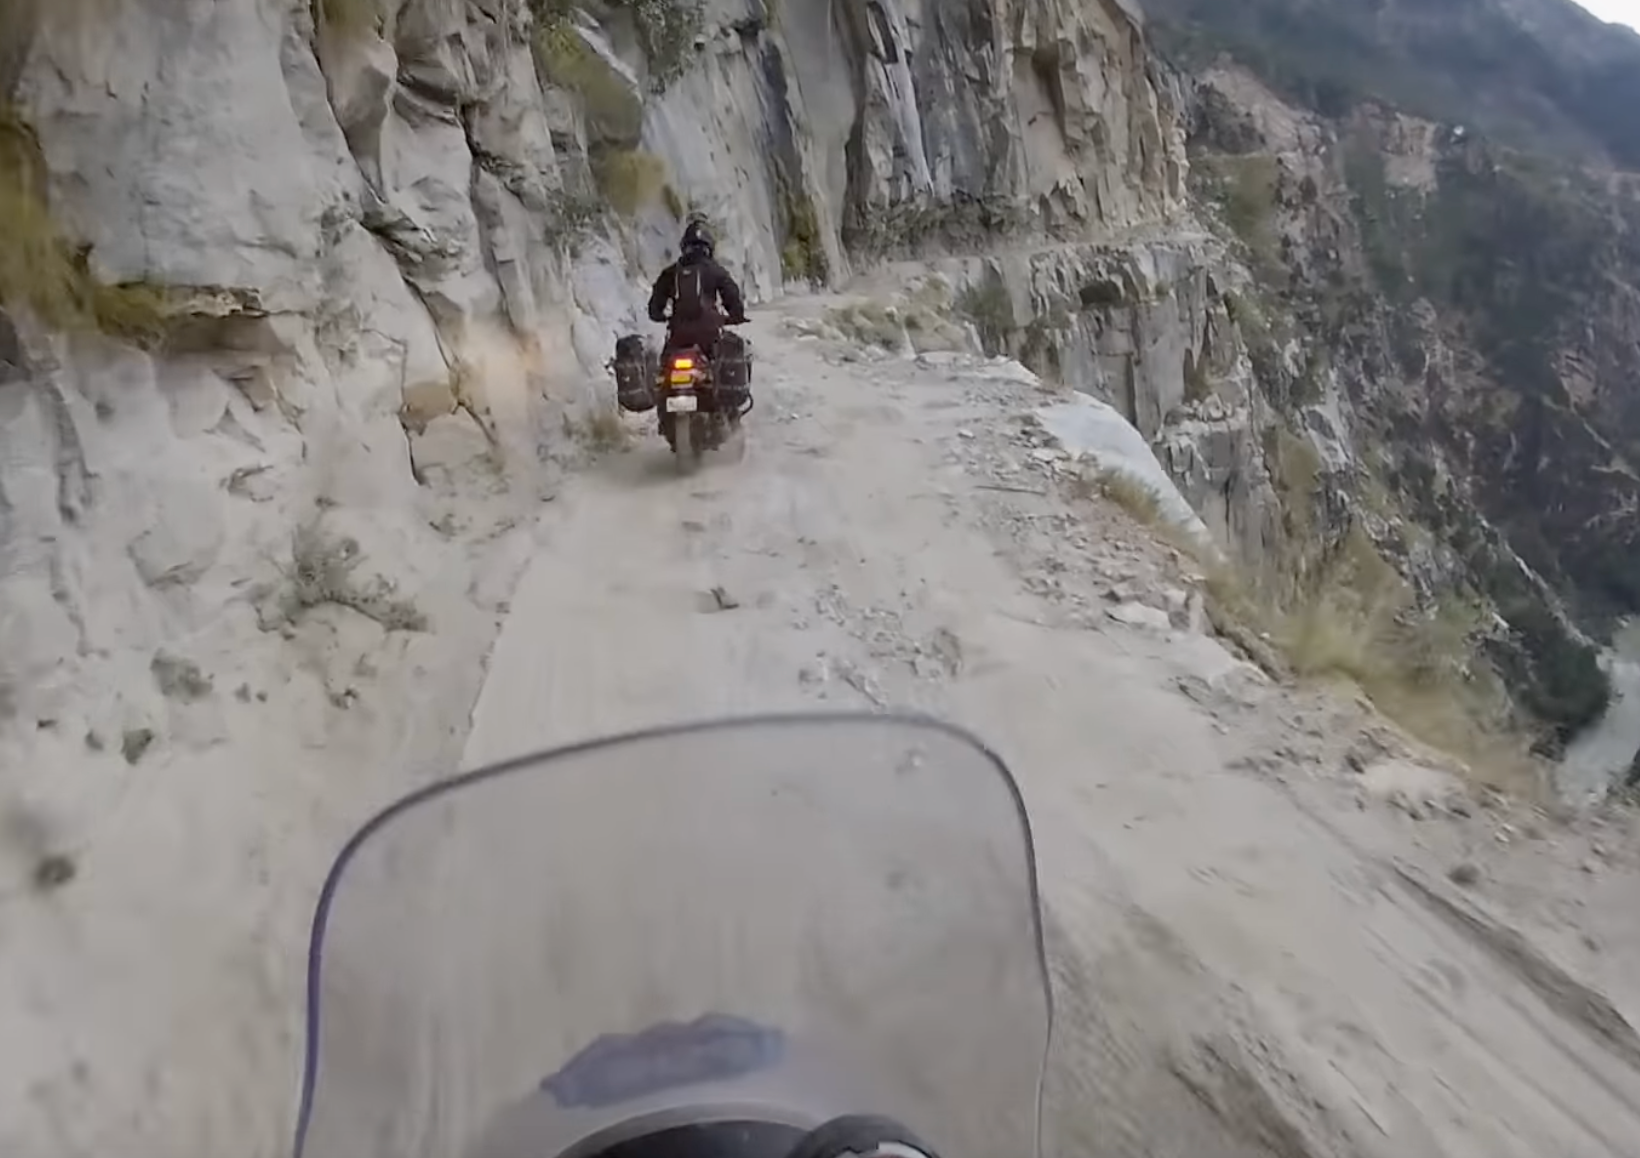 UPSHIFT IN INDIA: ROAD TO NOWHERE ON ROYAL ENFIELD HIMALAYANS